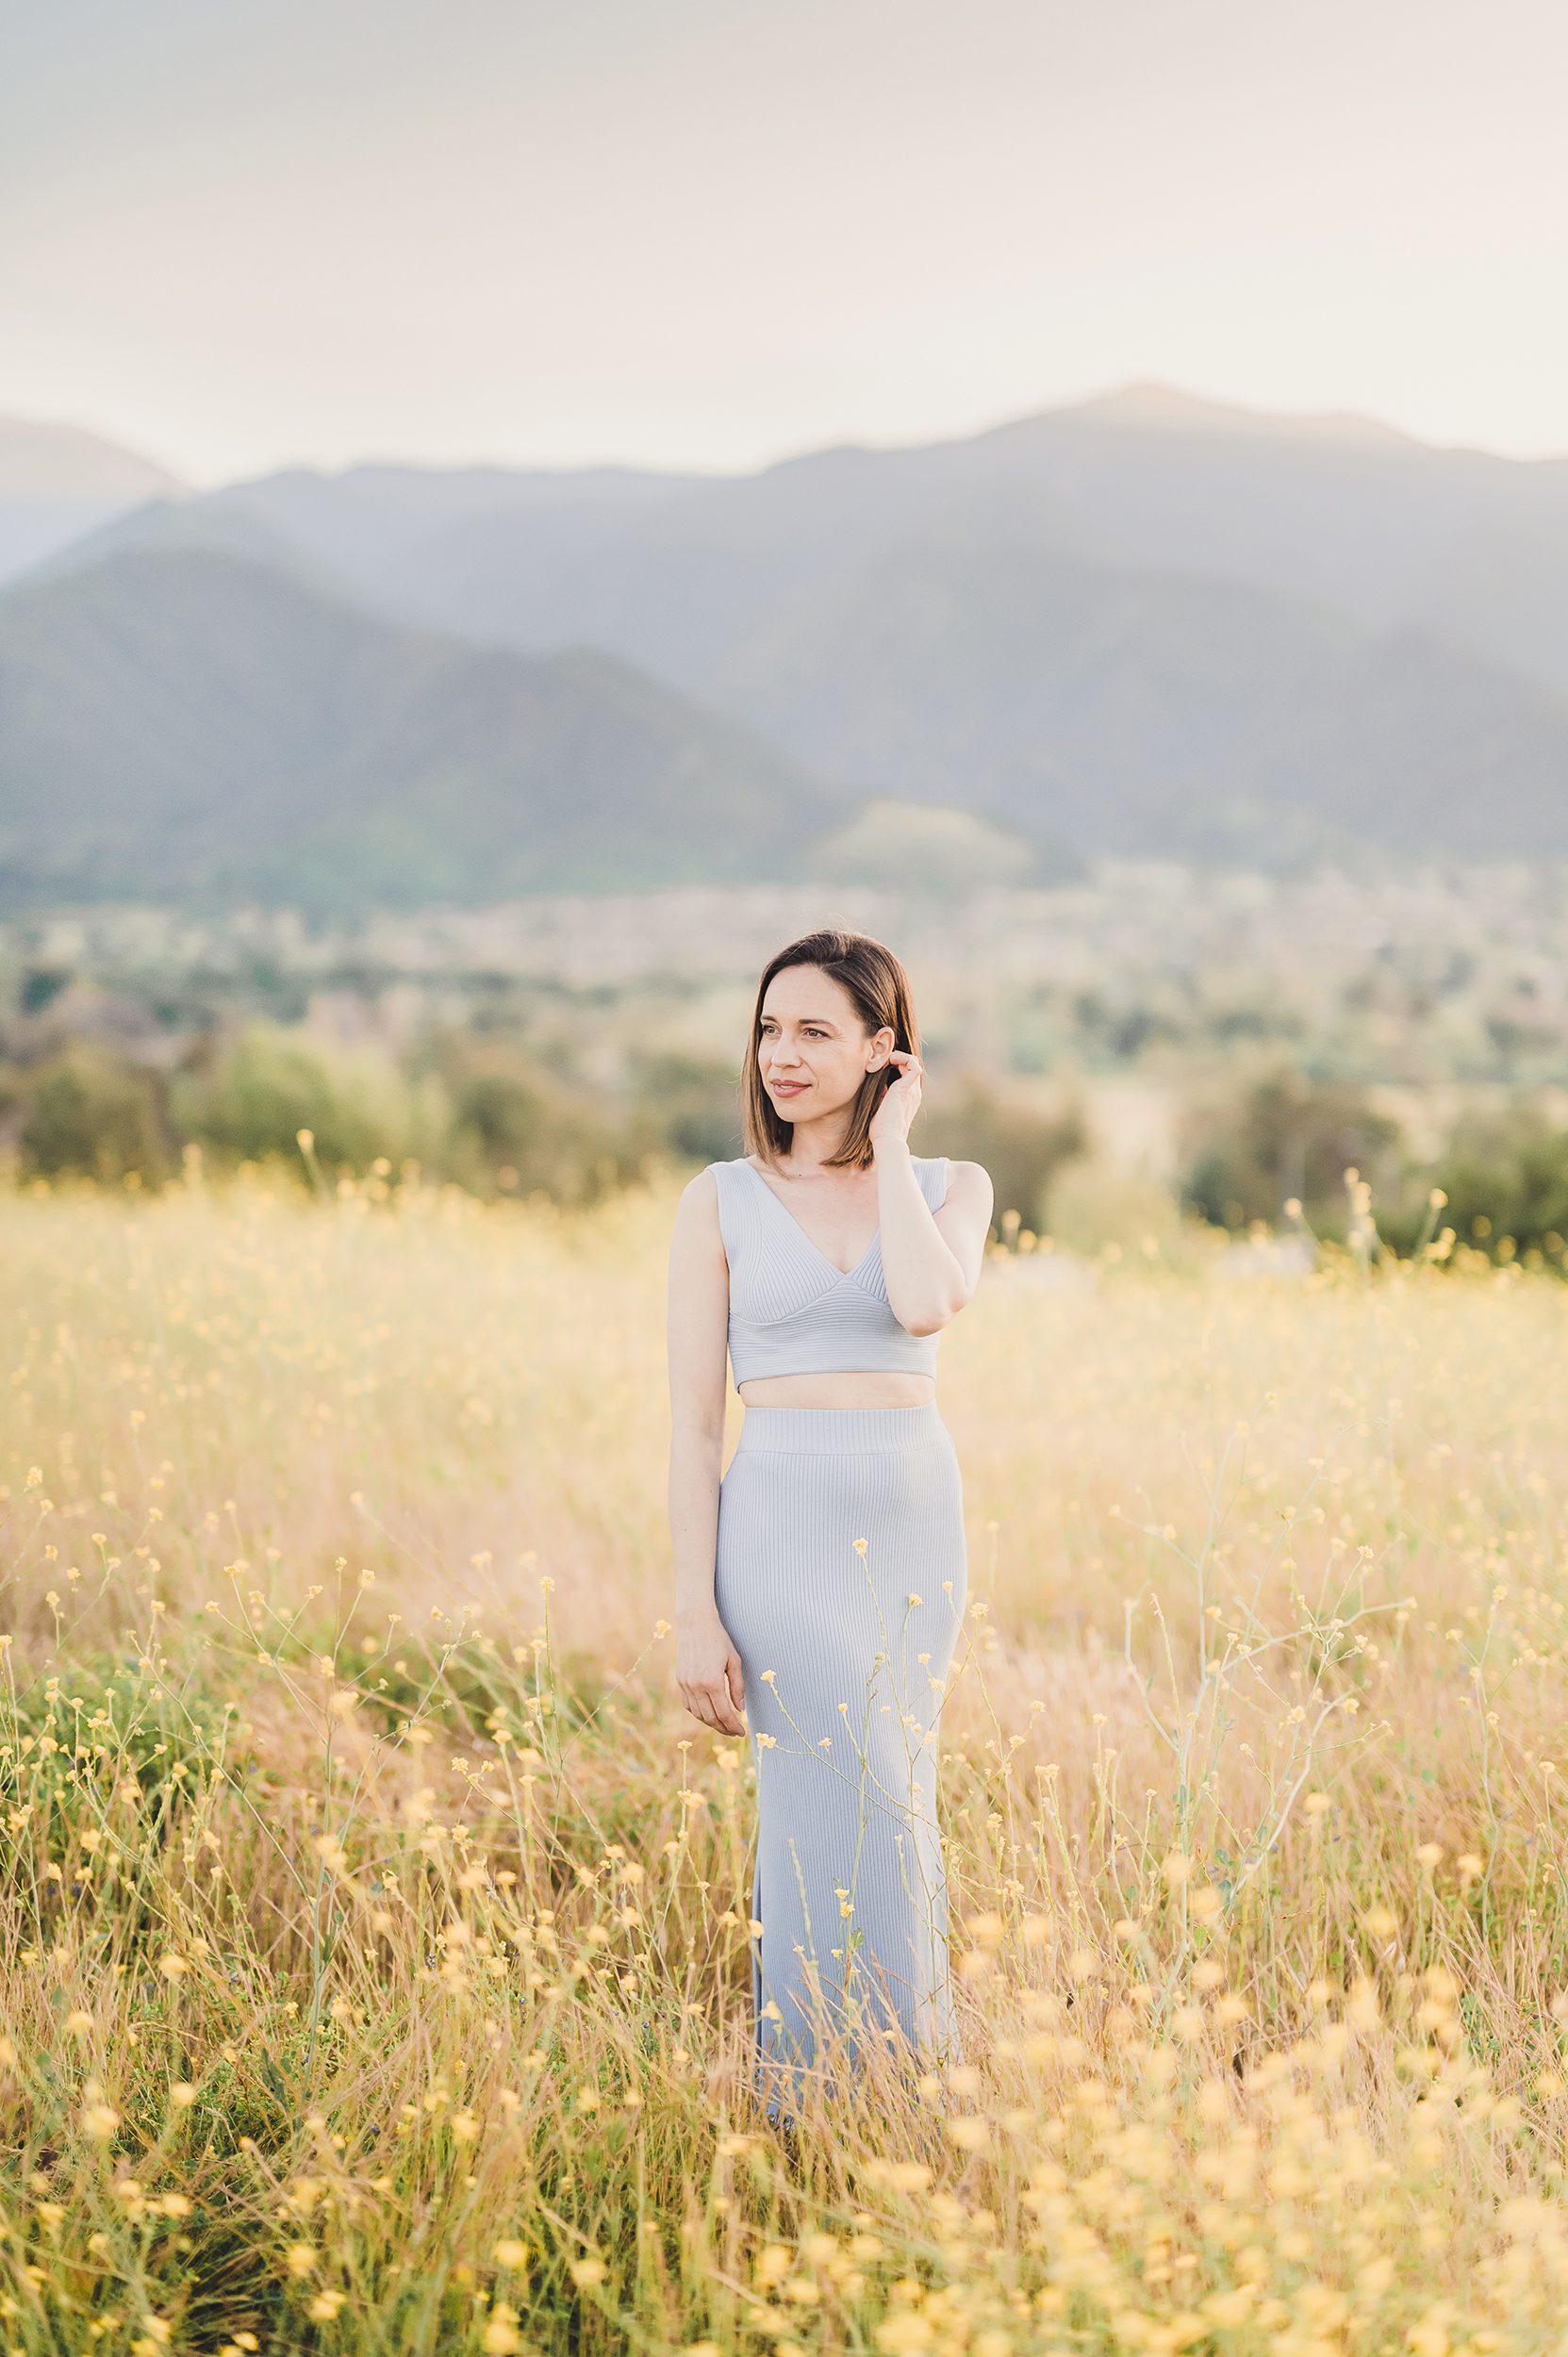 Ellie Fuqua, owner of Sun & Sparrow Photography, Stands in a field